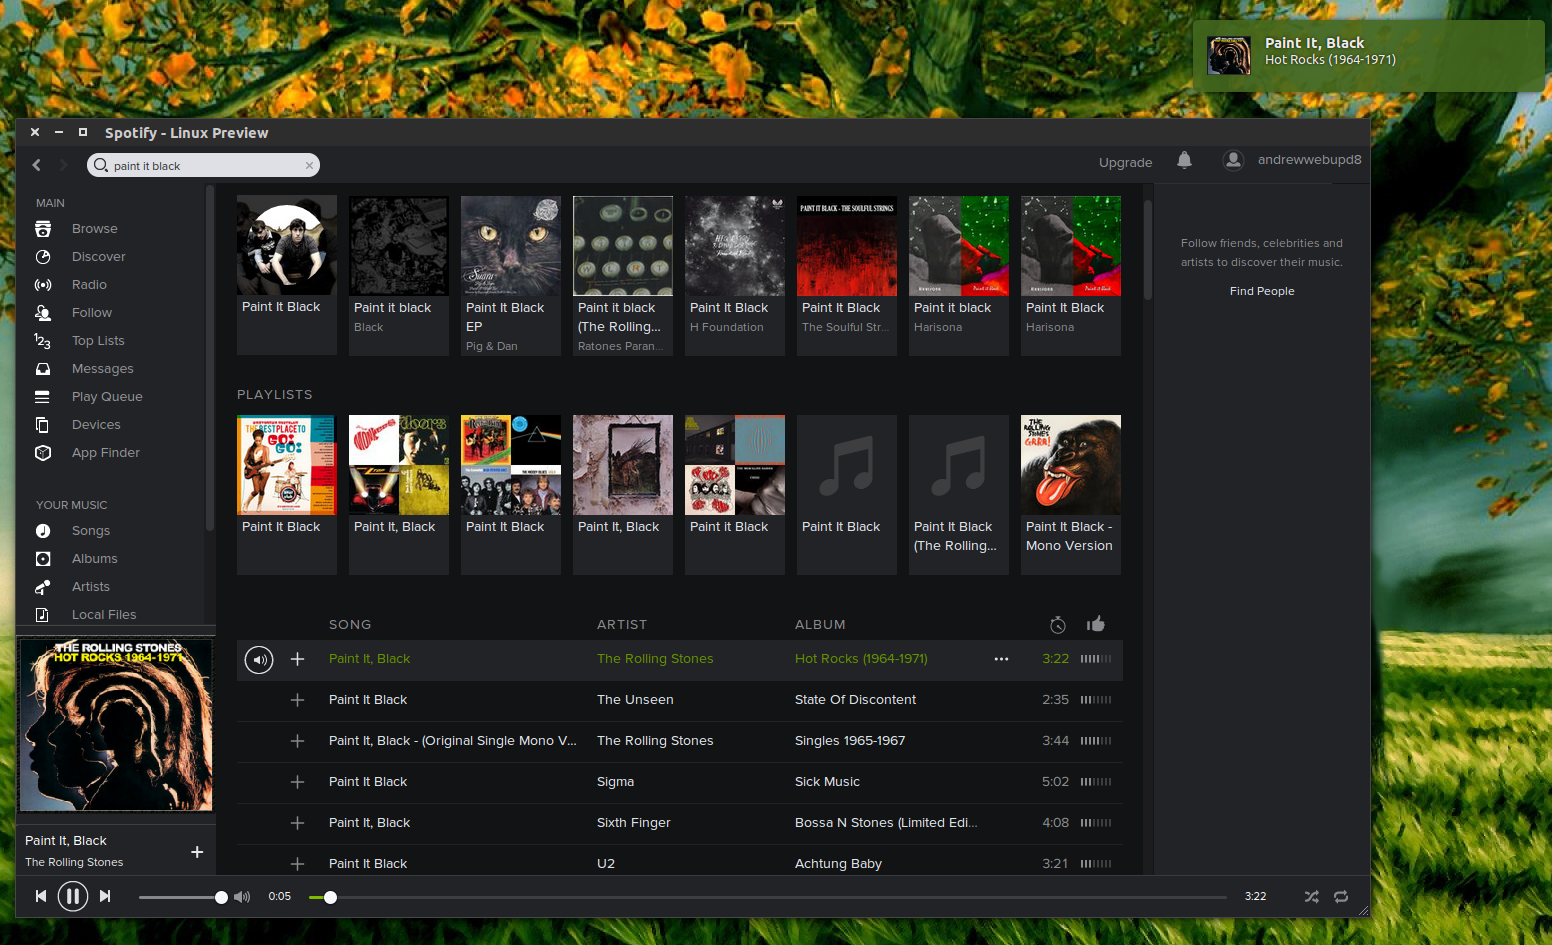 How to Download Spotify Music to Your Computer for Windows/Mac/Linux